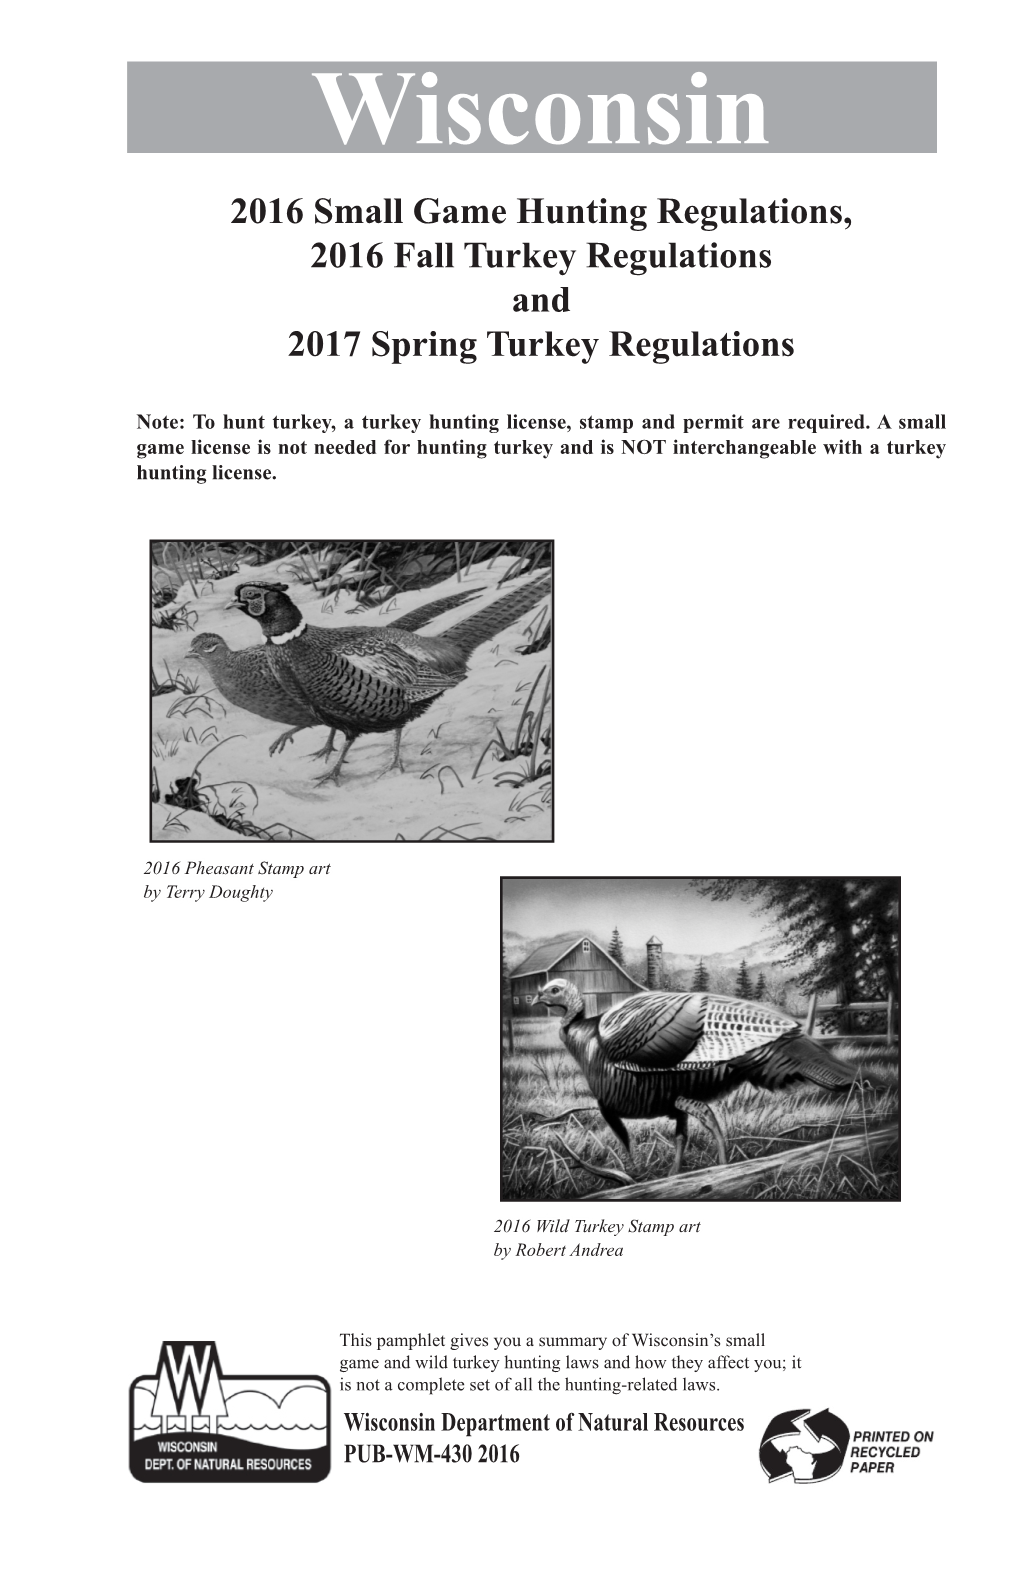 Wisconsin 2016 Small Game Hunting Regulations, 2016 Fall Turkey Regulations and 2017 Spring Turkey Regulations